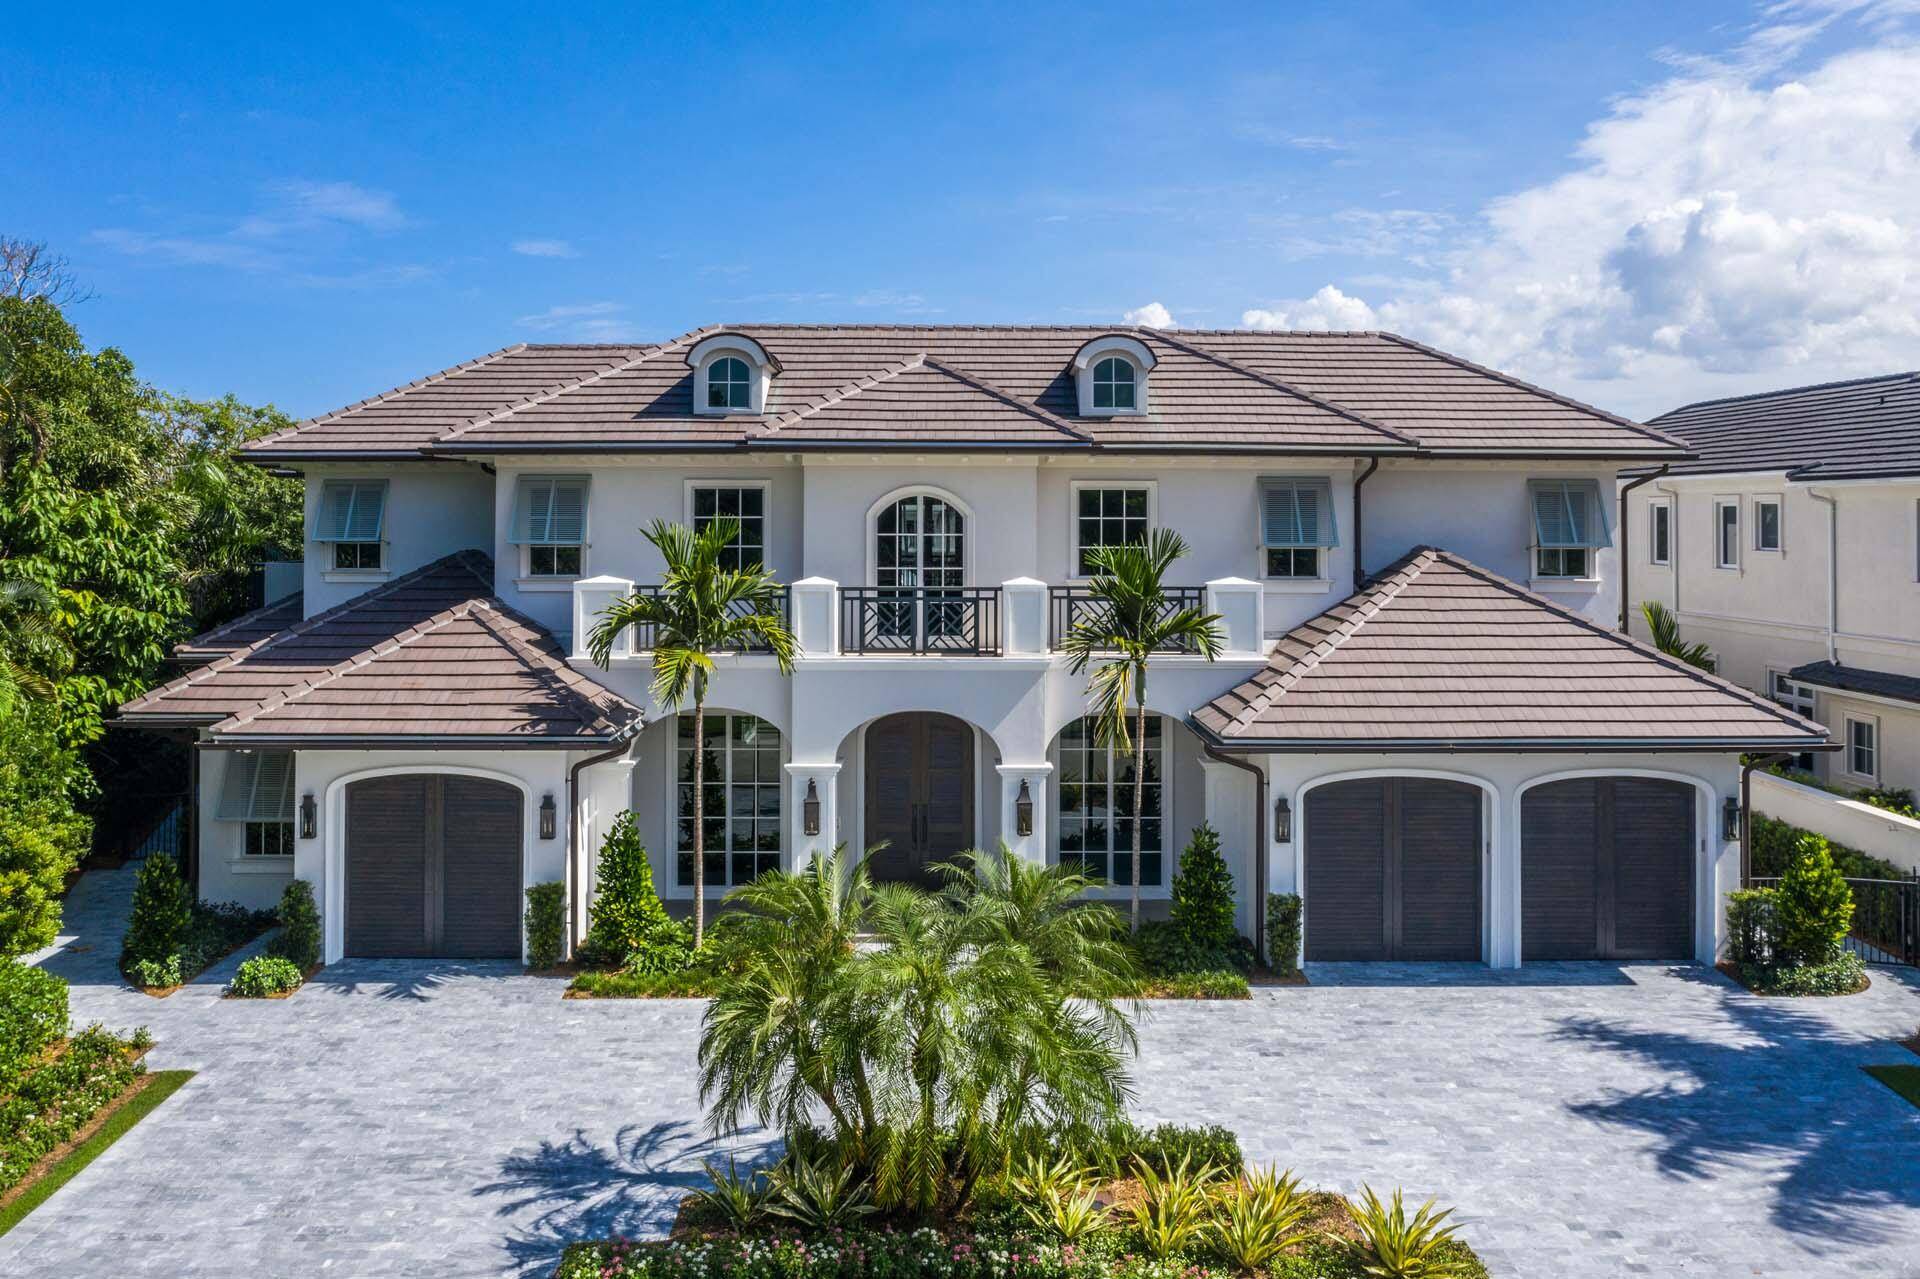 484 South Maya Palm Drive is a trophy waterfront estate fronted on 132' of the widest canal with direct Intracoastal and Ocean access, desired southeast exposure, deep water dock, and ...